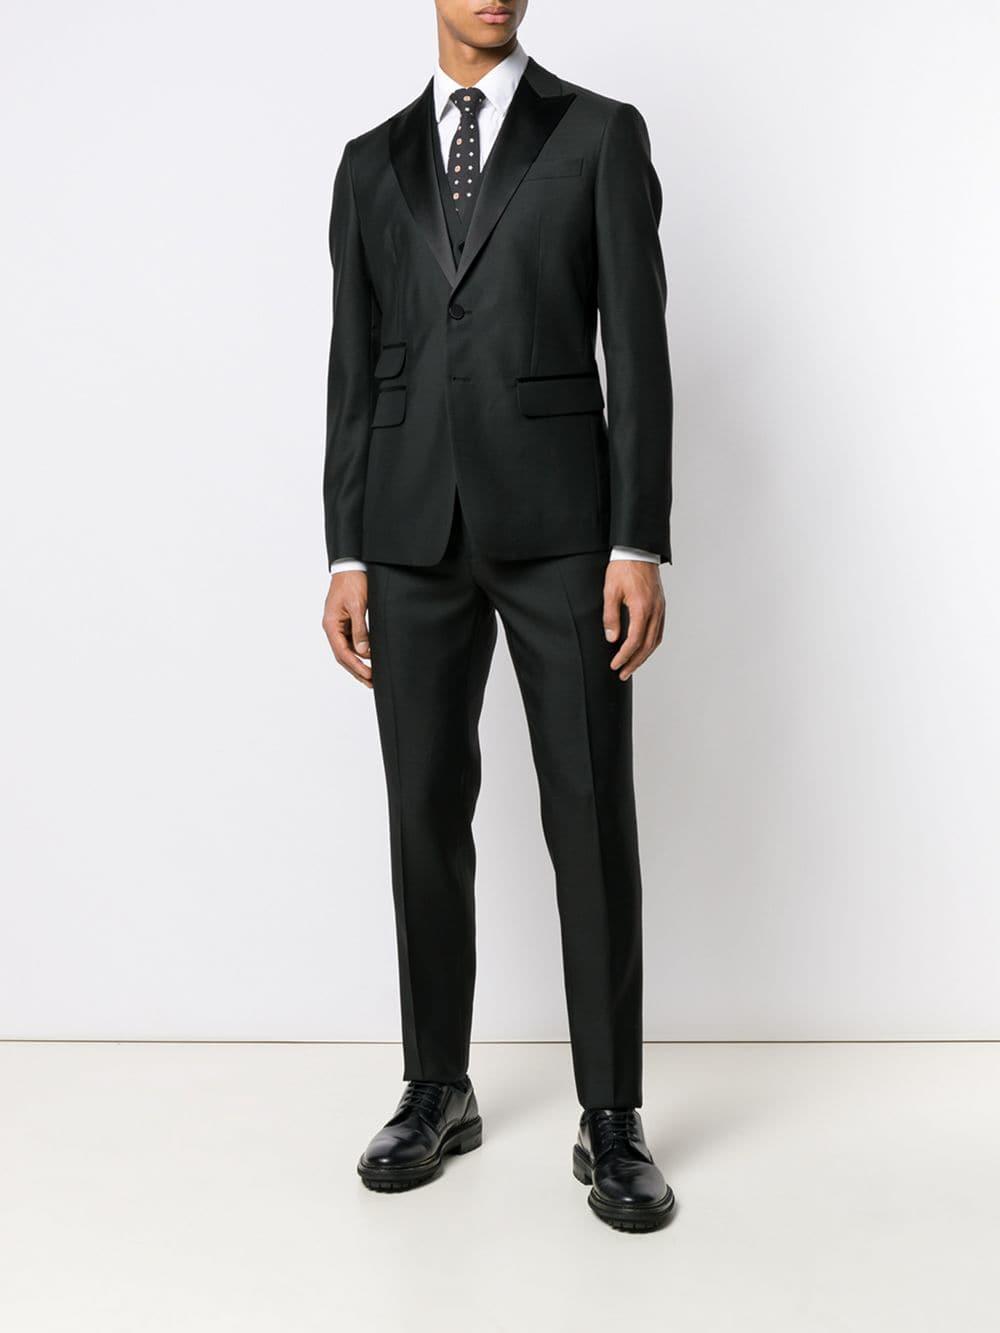 Lyst - DSquared² Formal Three Piece Suit in Black for Men